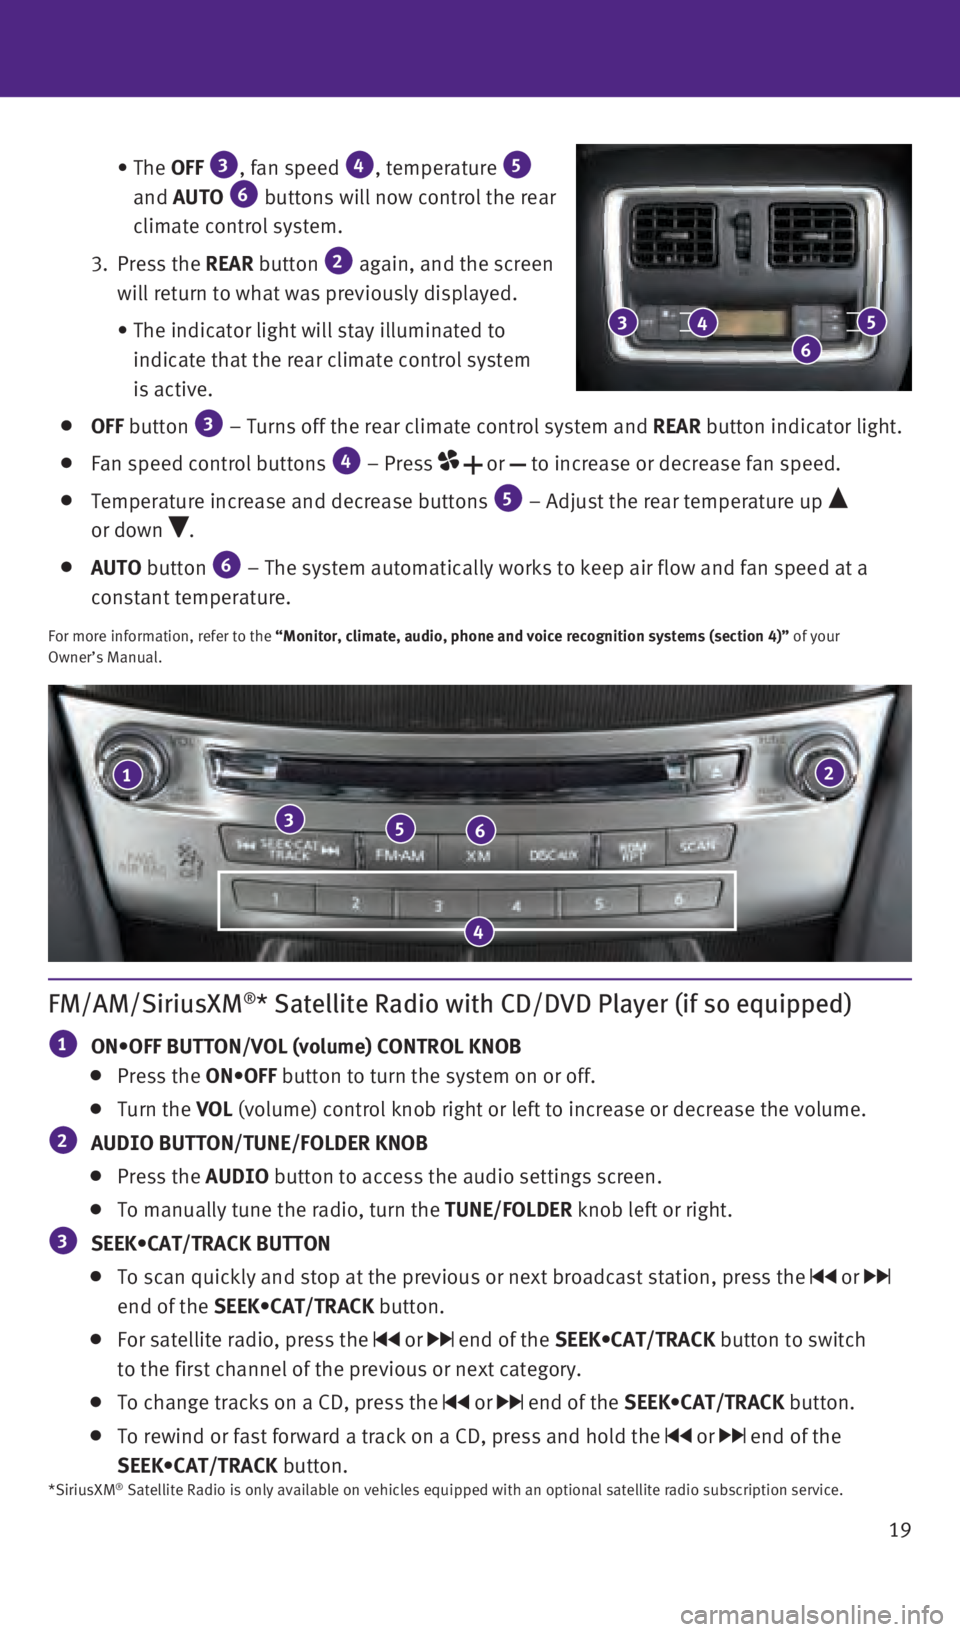 INFINITI QX60 2016  Quick Reference Guide 19
   

 
•  The 
OFF

 
3, fan speed 4, temperature 5 
and AUTO 6 buttons will now control the rear 
climate control system. 
   3. 

 
Press 

the  REAR button 
2 again, and the screen 
will retur